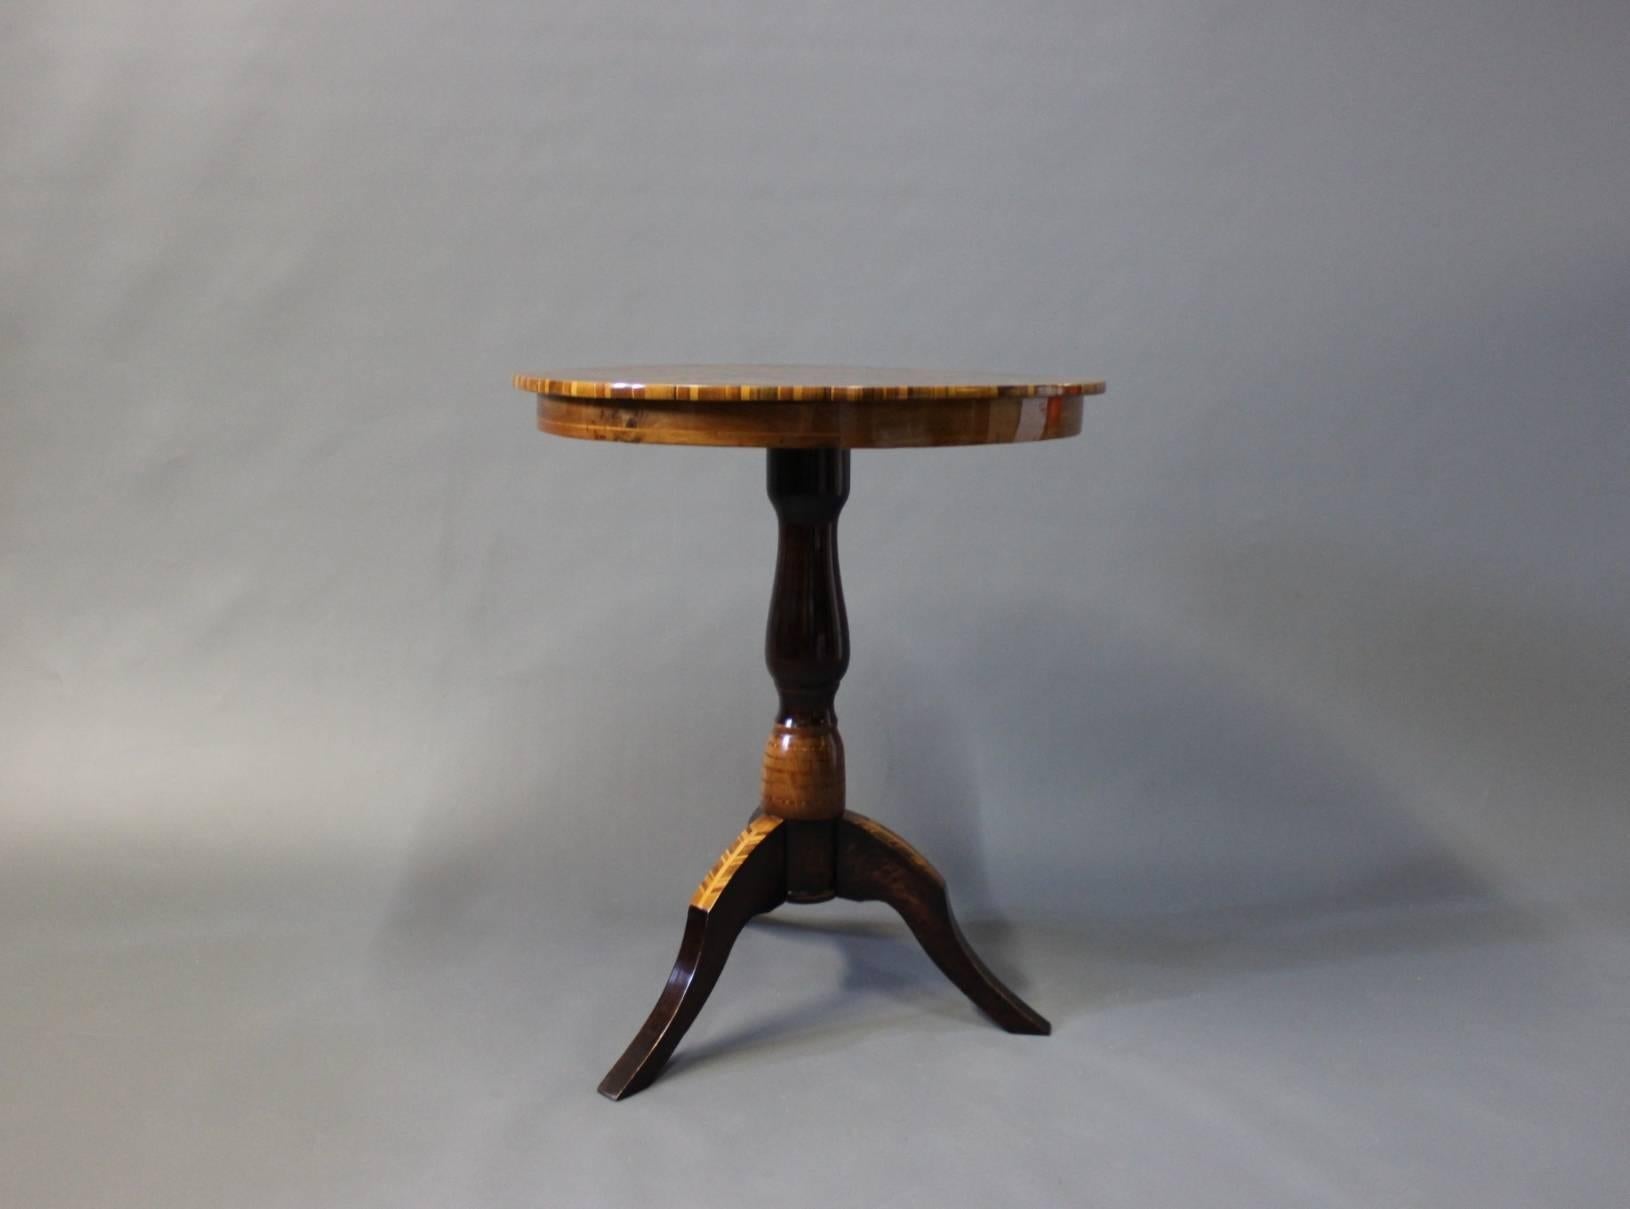 Antique lamp table made in Italy near Verona in 1880.
The table is in walnut with intarsia of fruitwood. It has been hand polished.